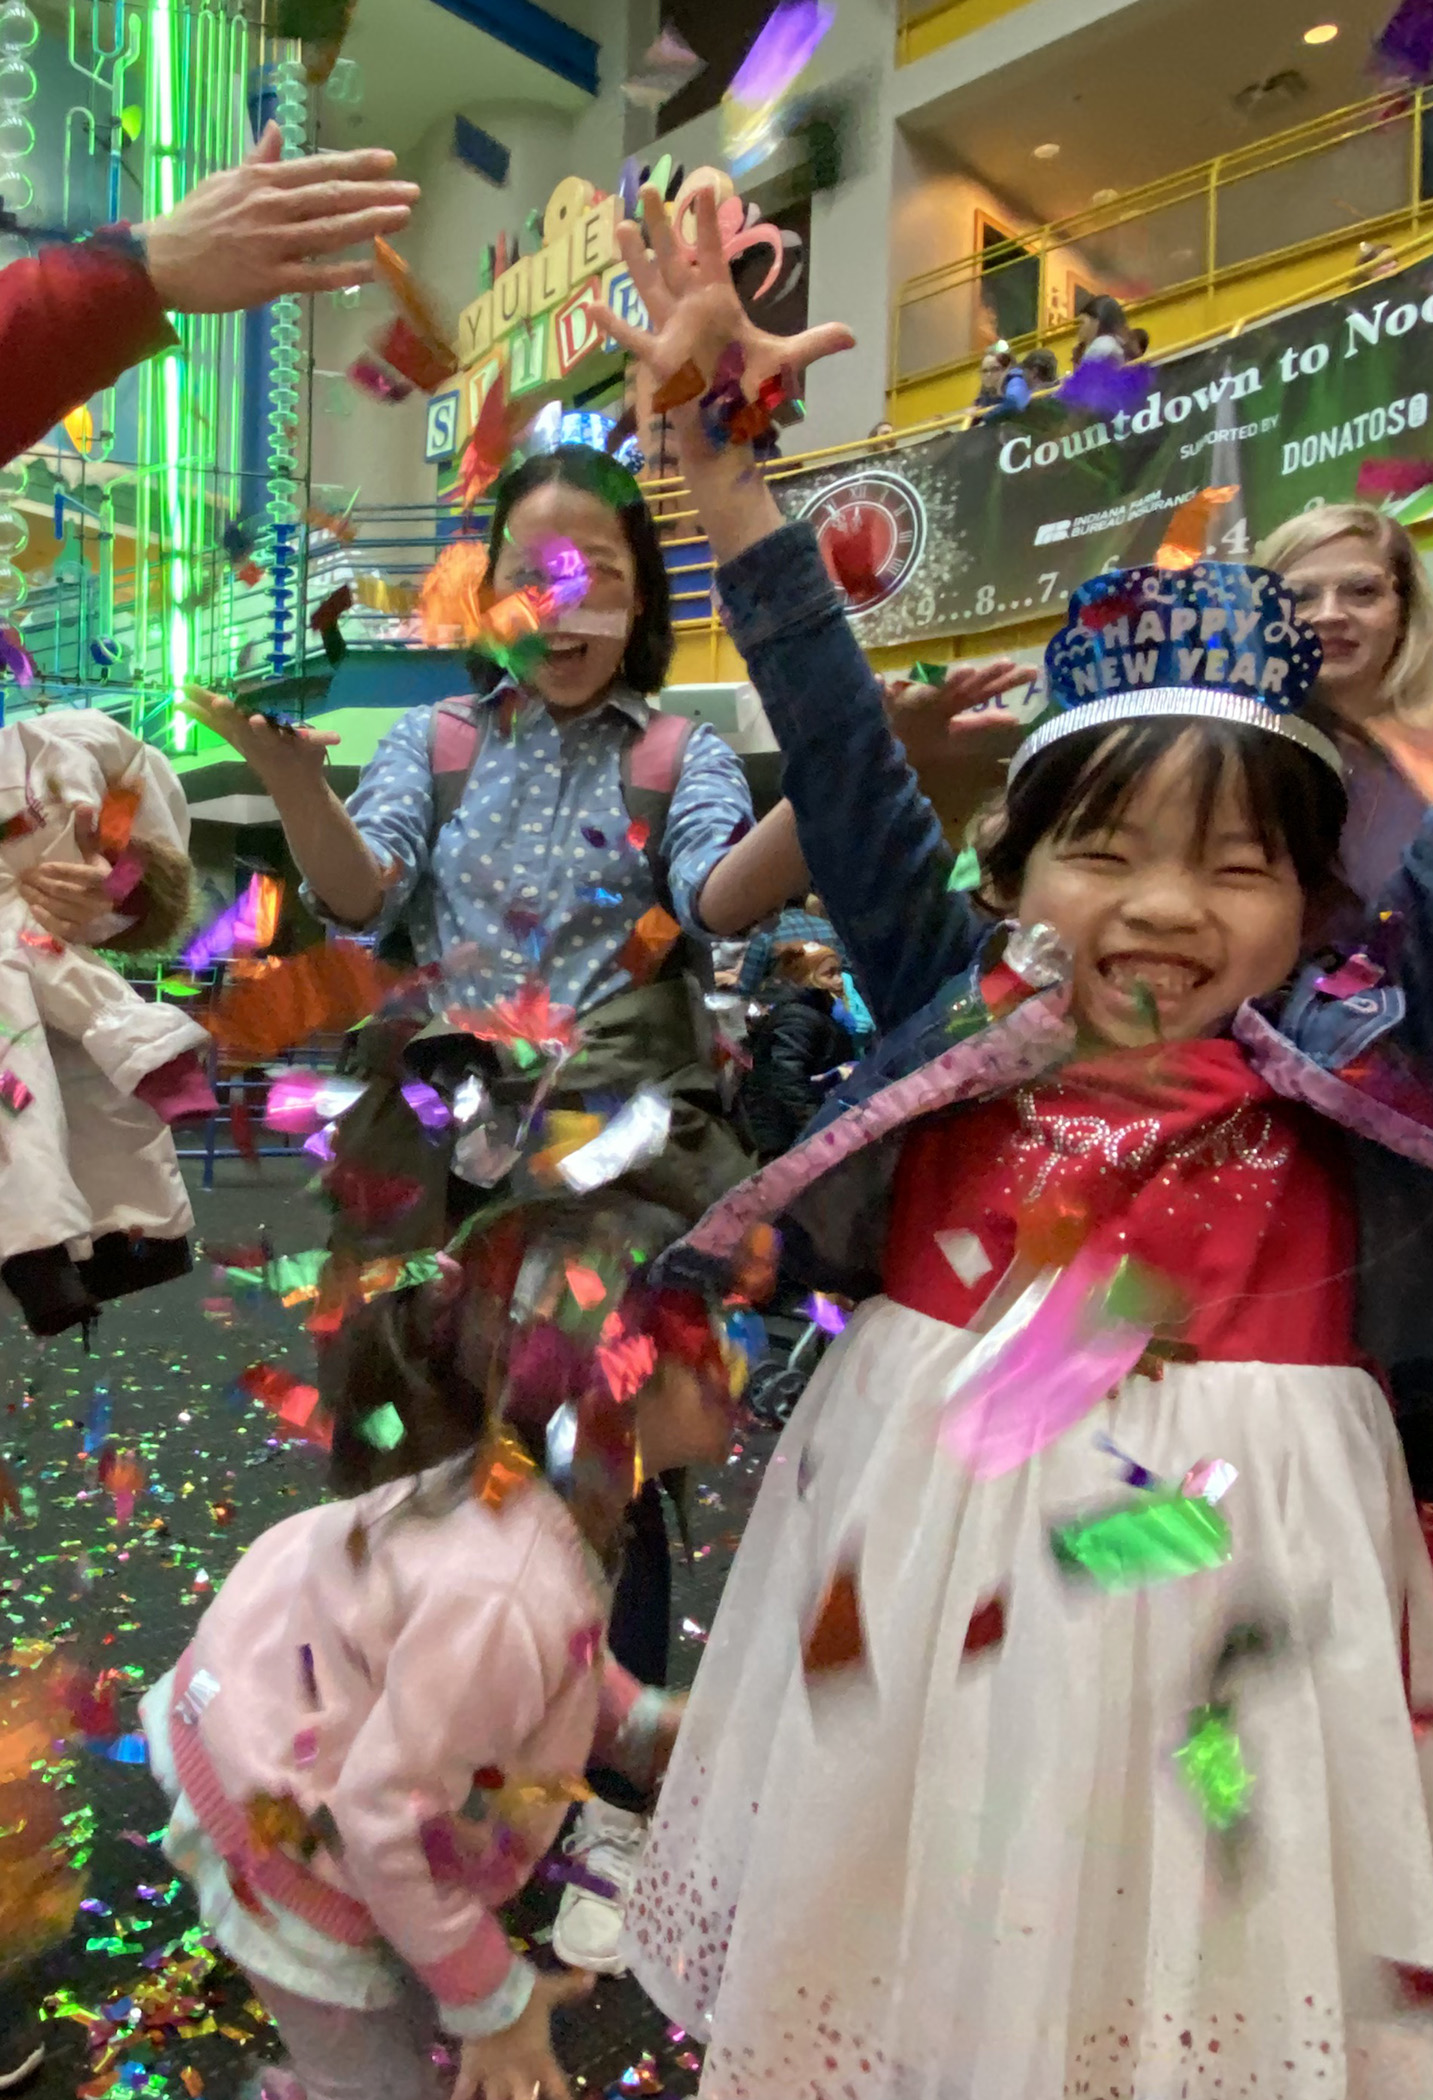 Confetti rains down in this New Year's Eve celebration